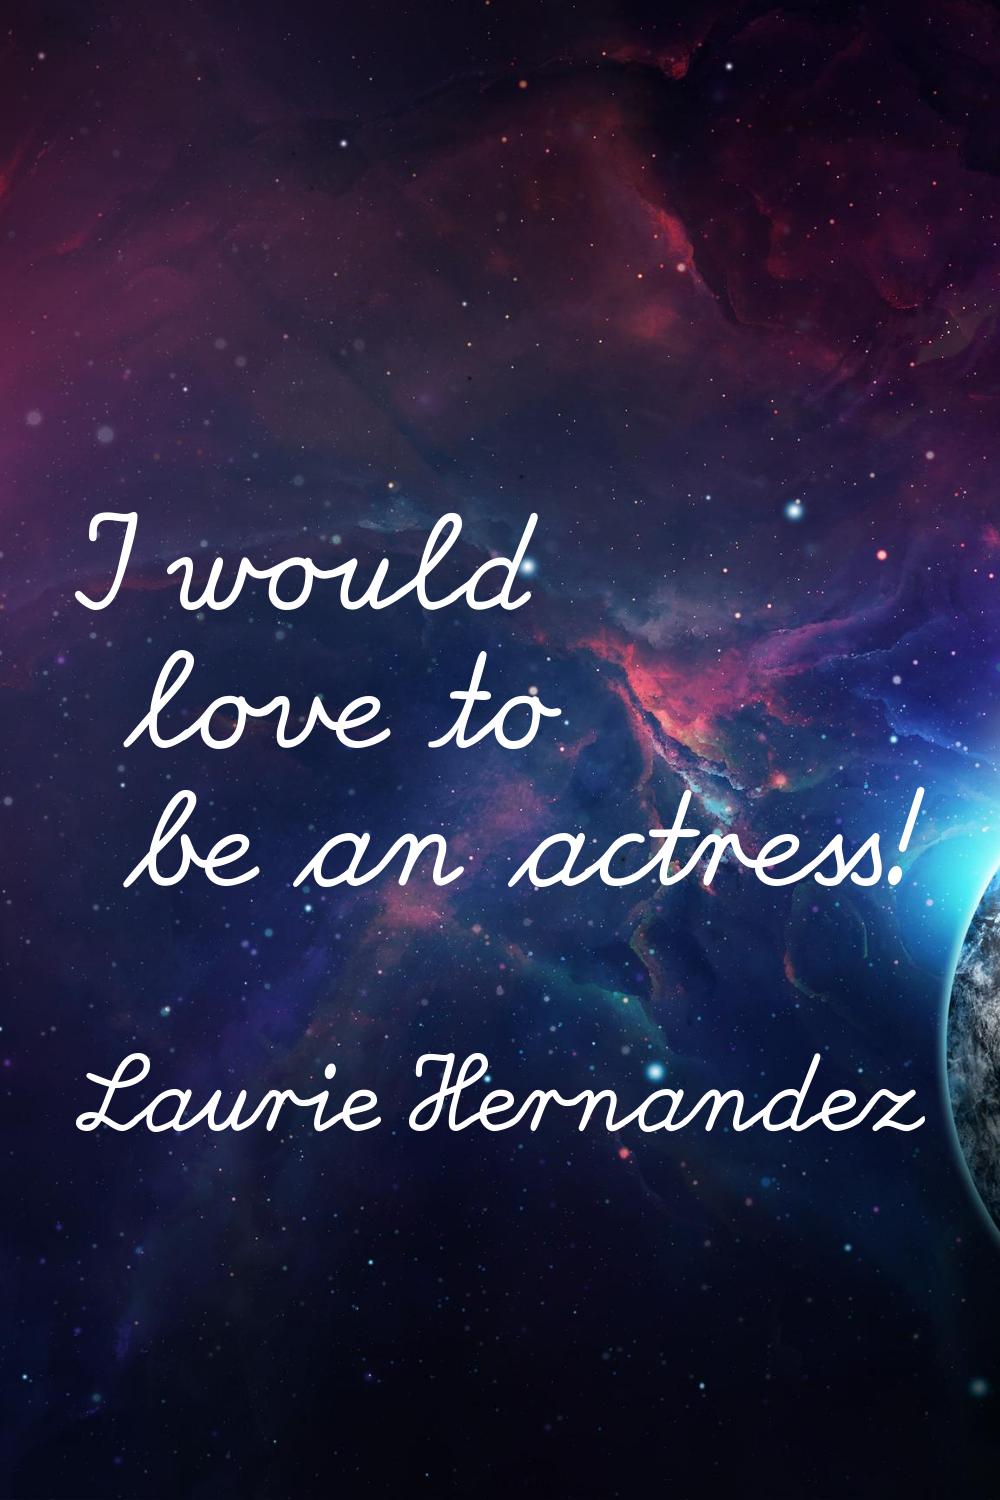 I would love to be an actress!